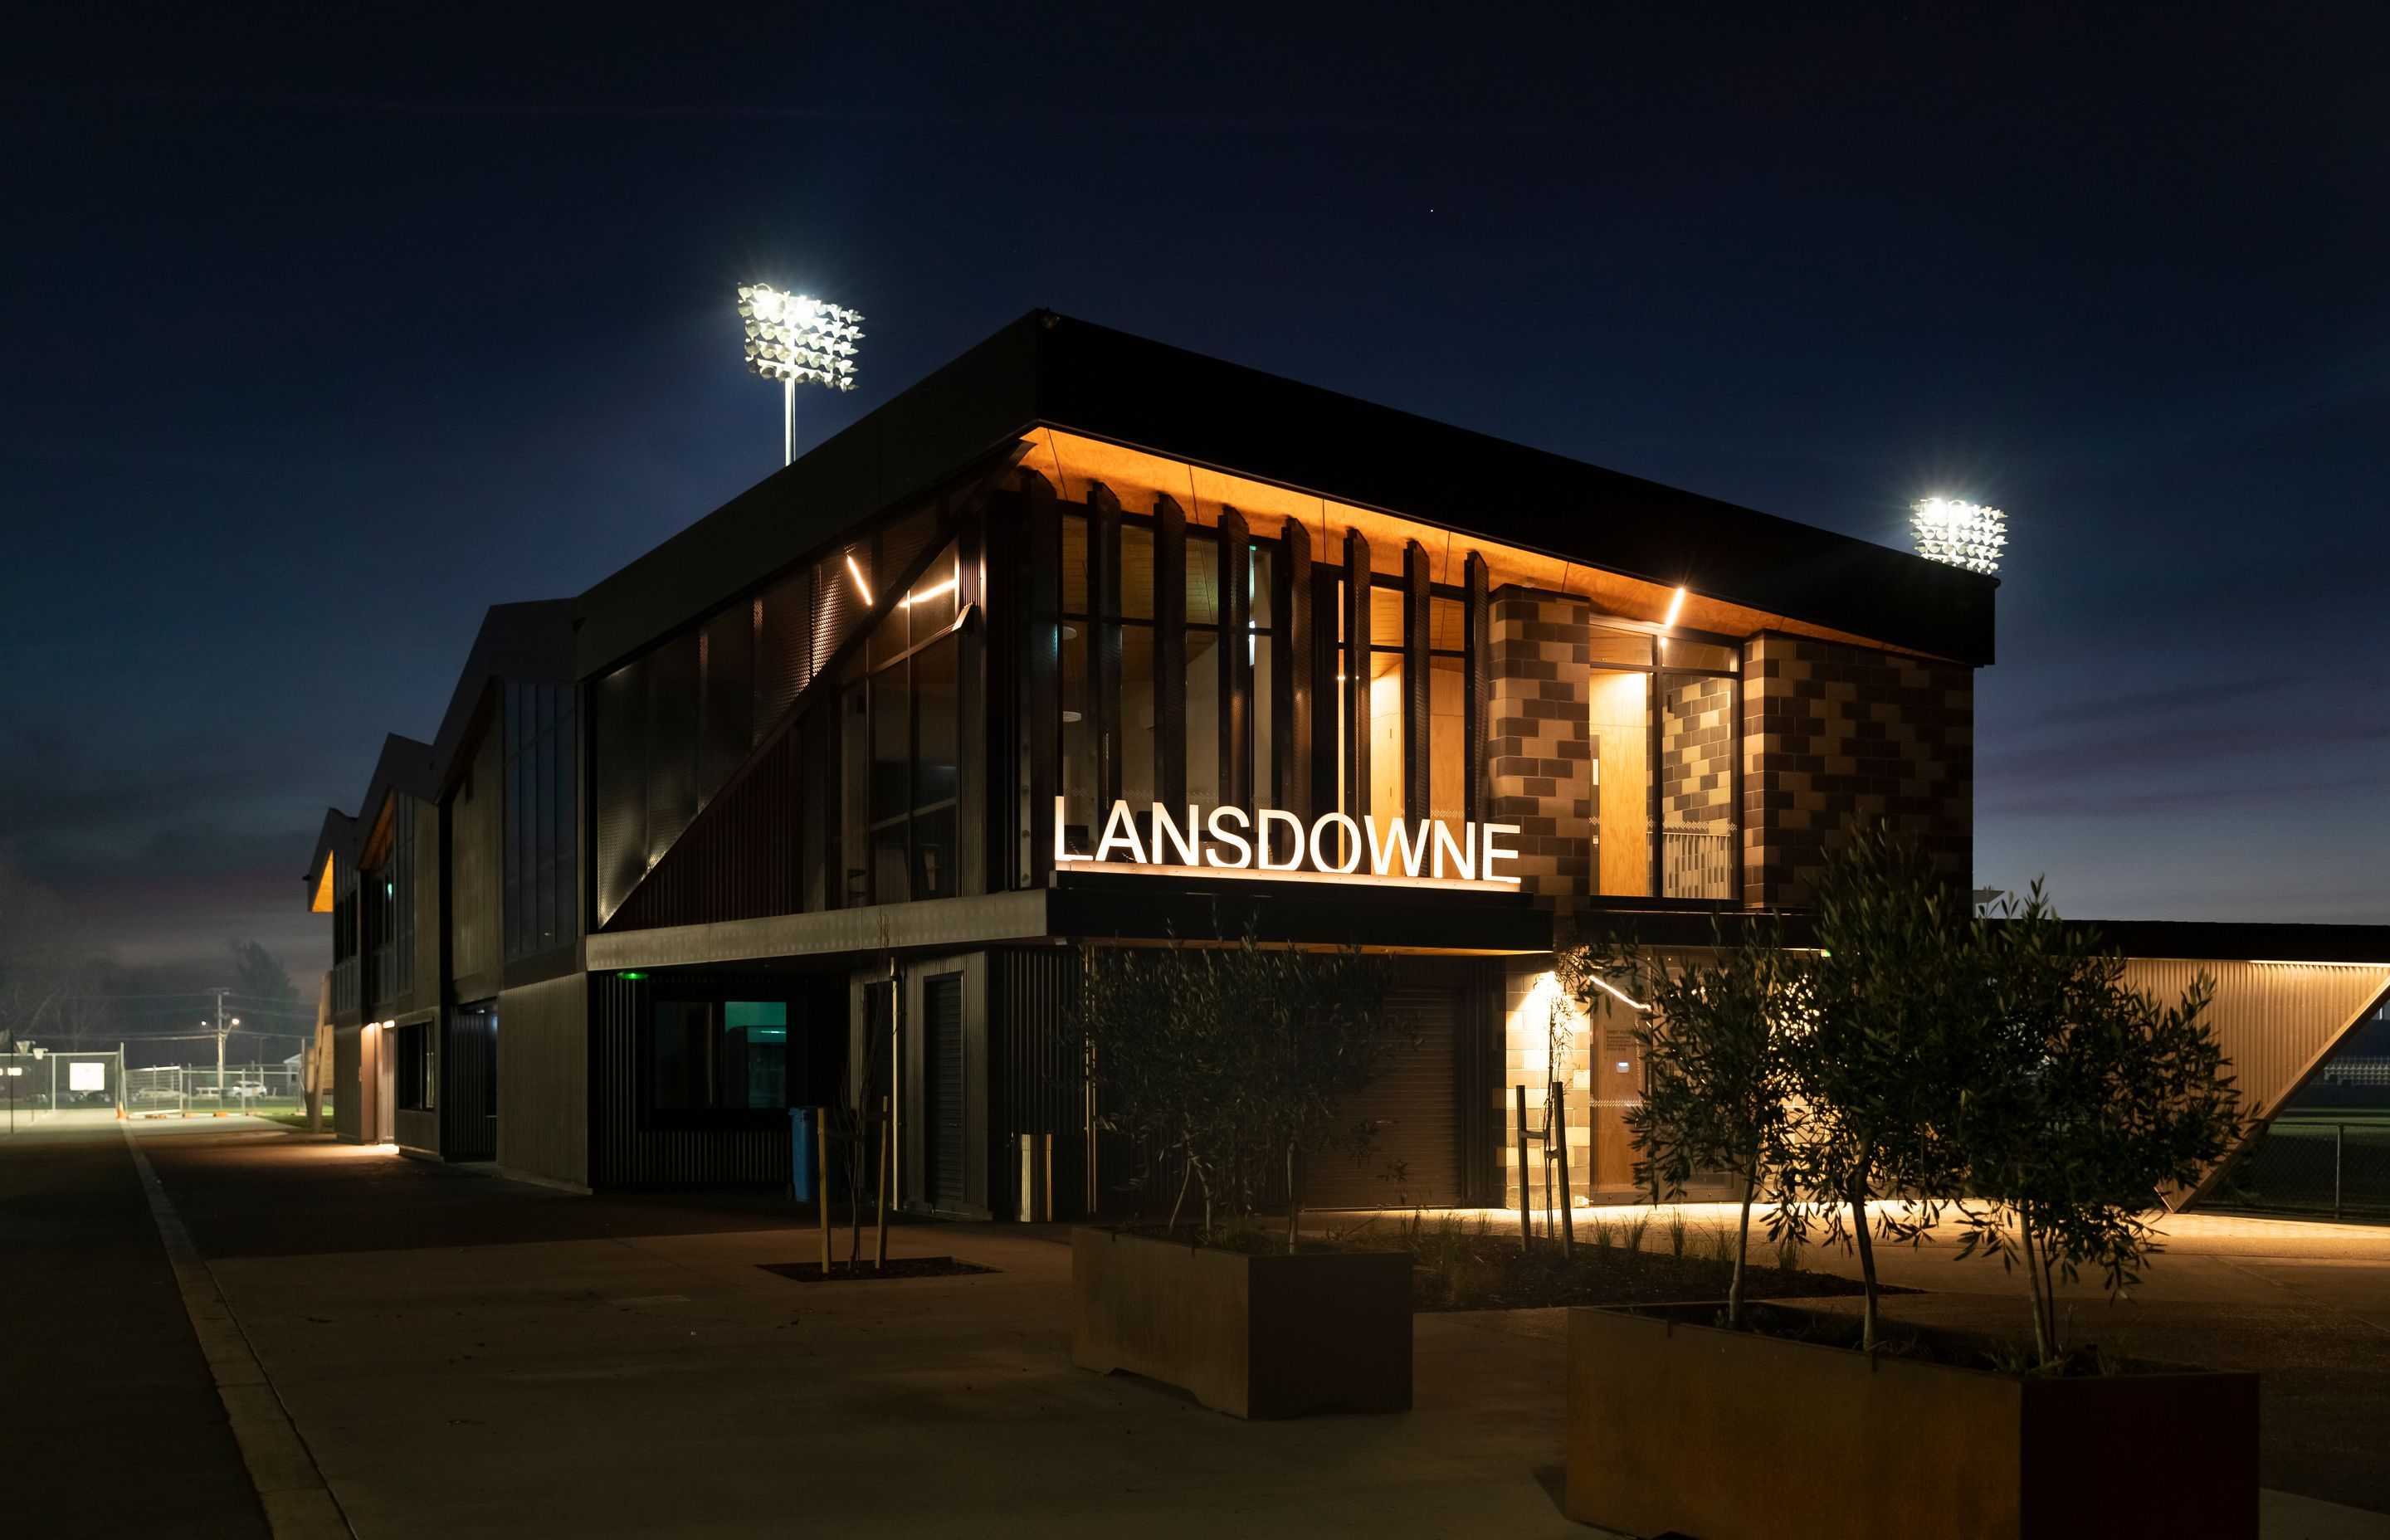 At night, the entrance to the building is lit up and sports can be easily viewed under the powerful floodlights.